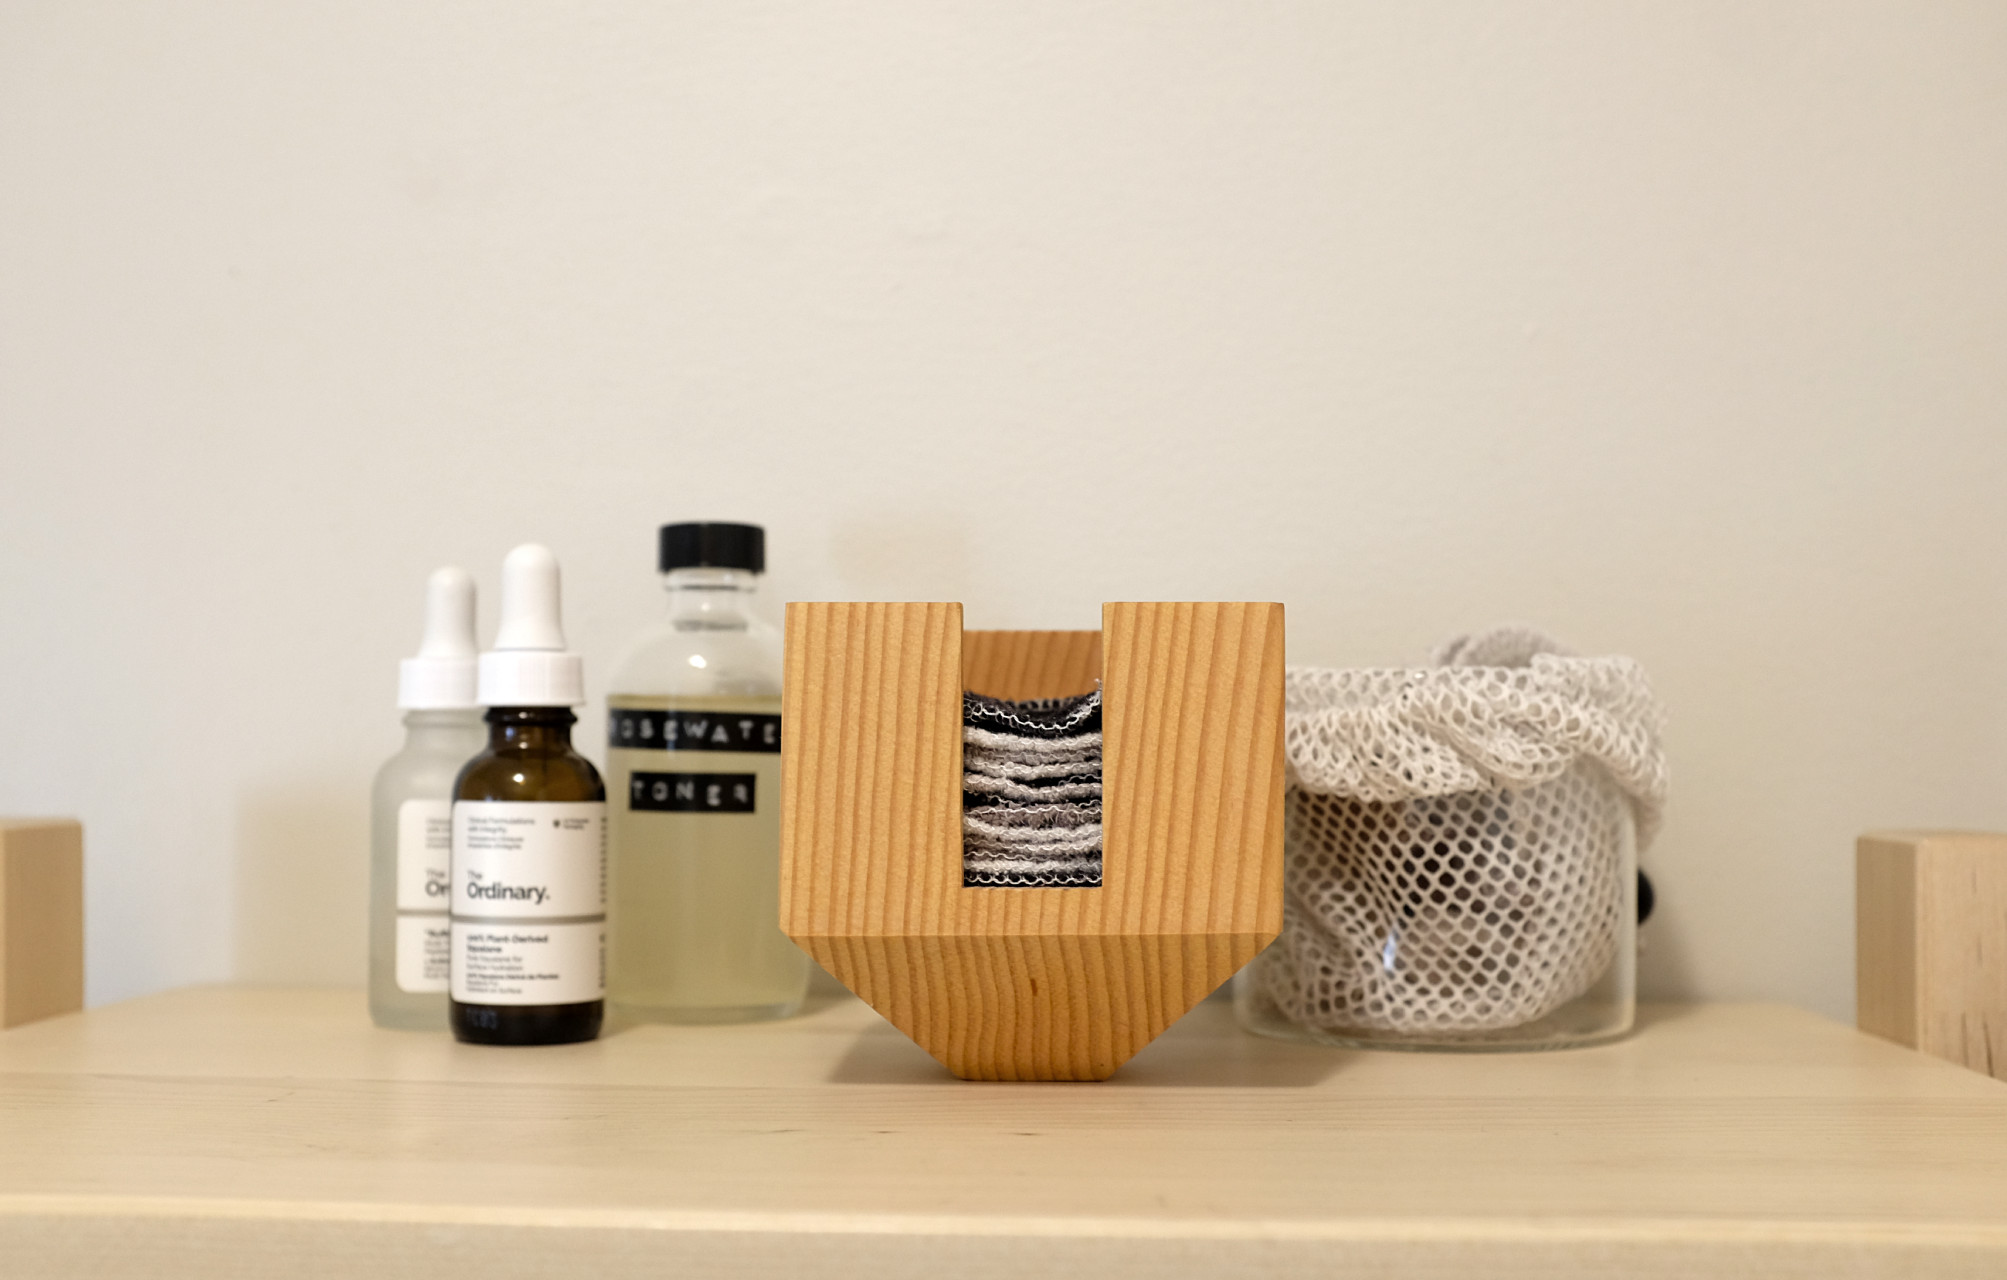 A bathroom shelf topped with several glass bottles of serums and toner, as well as a small wooden block containing cotton flannel face rounds and a glass container lined with a mesh bag